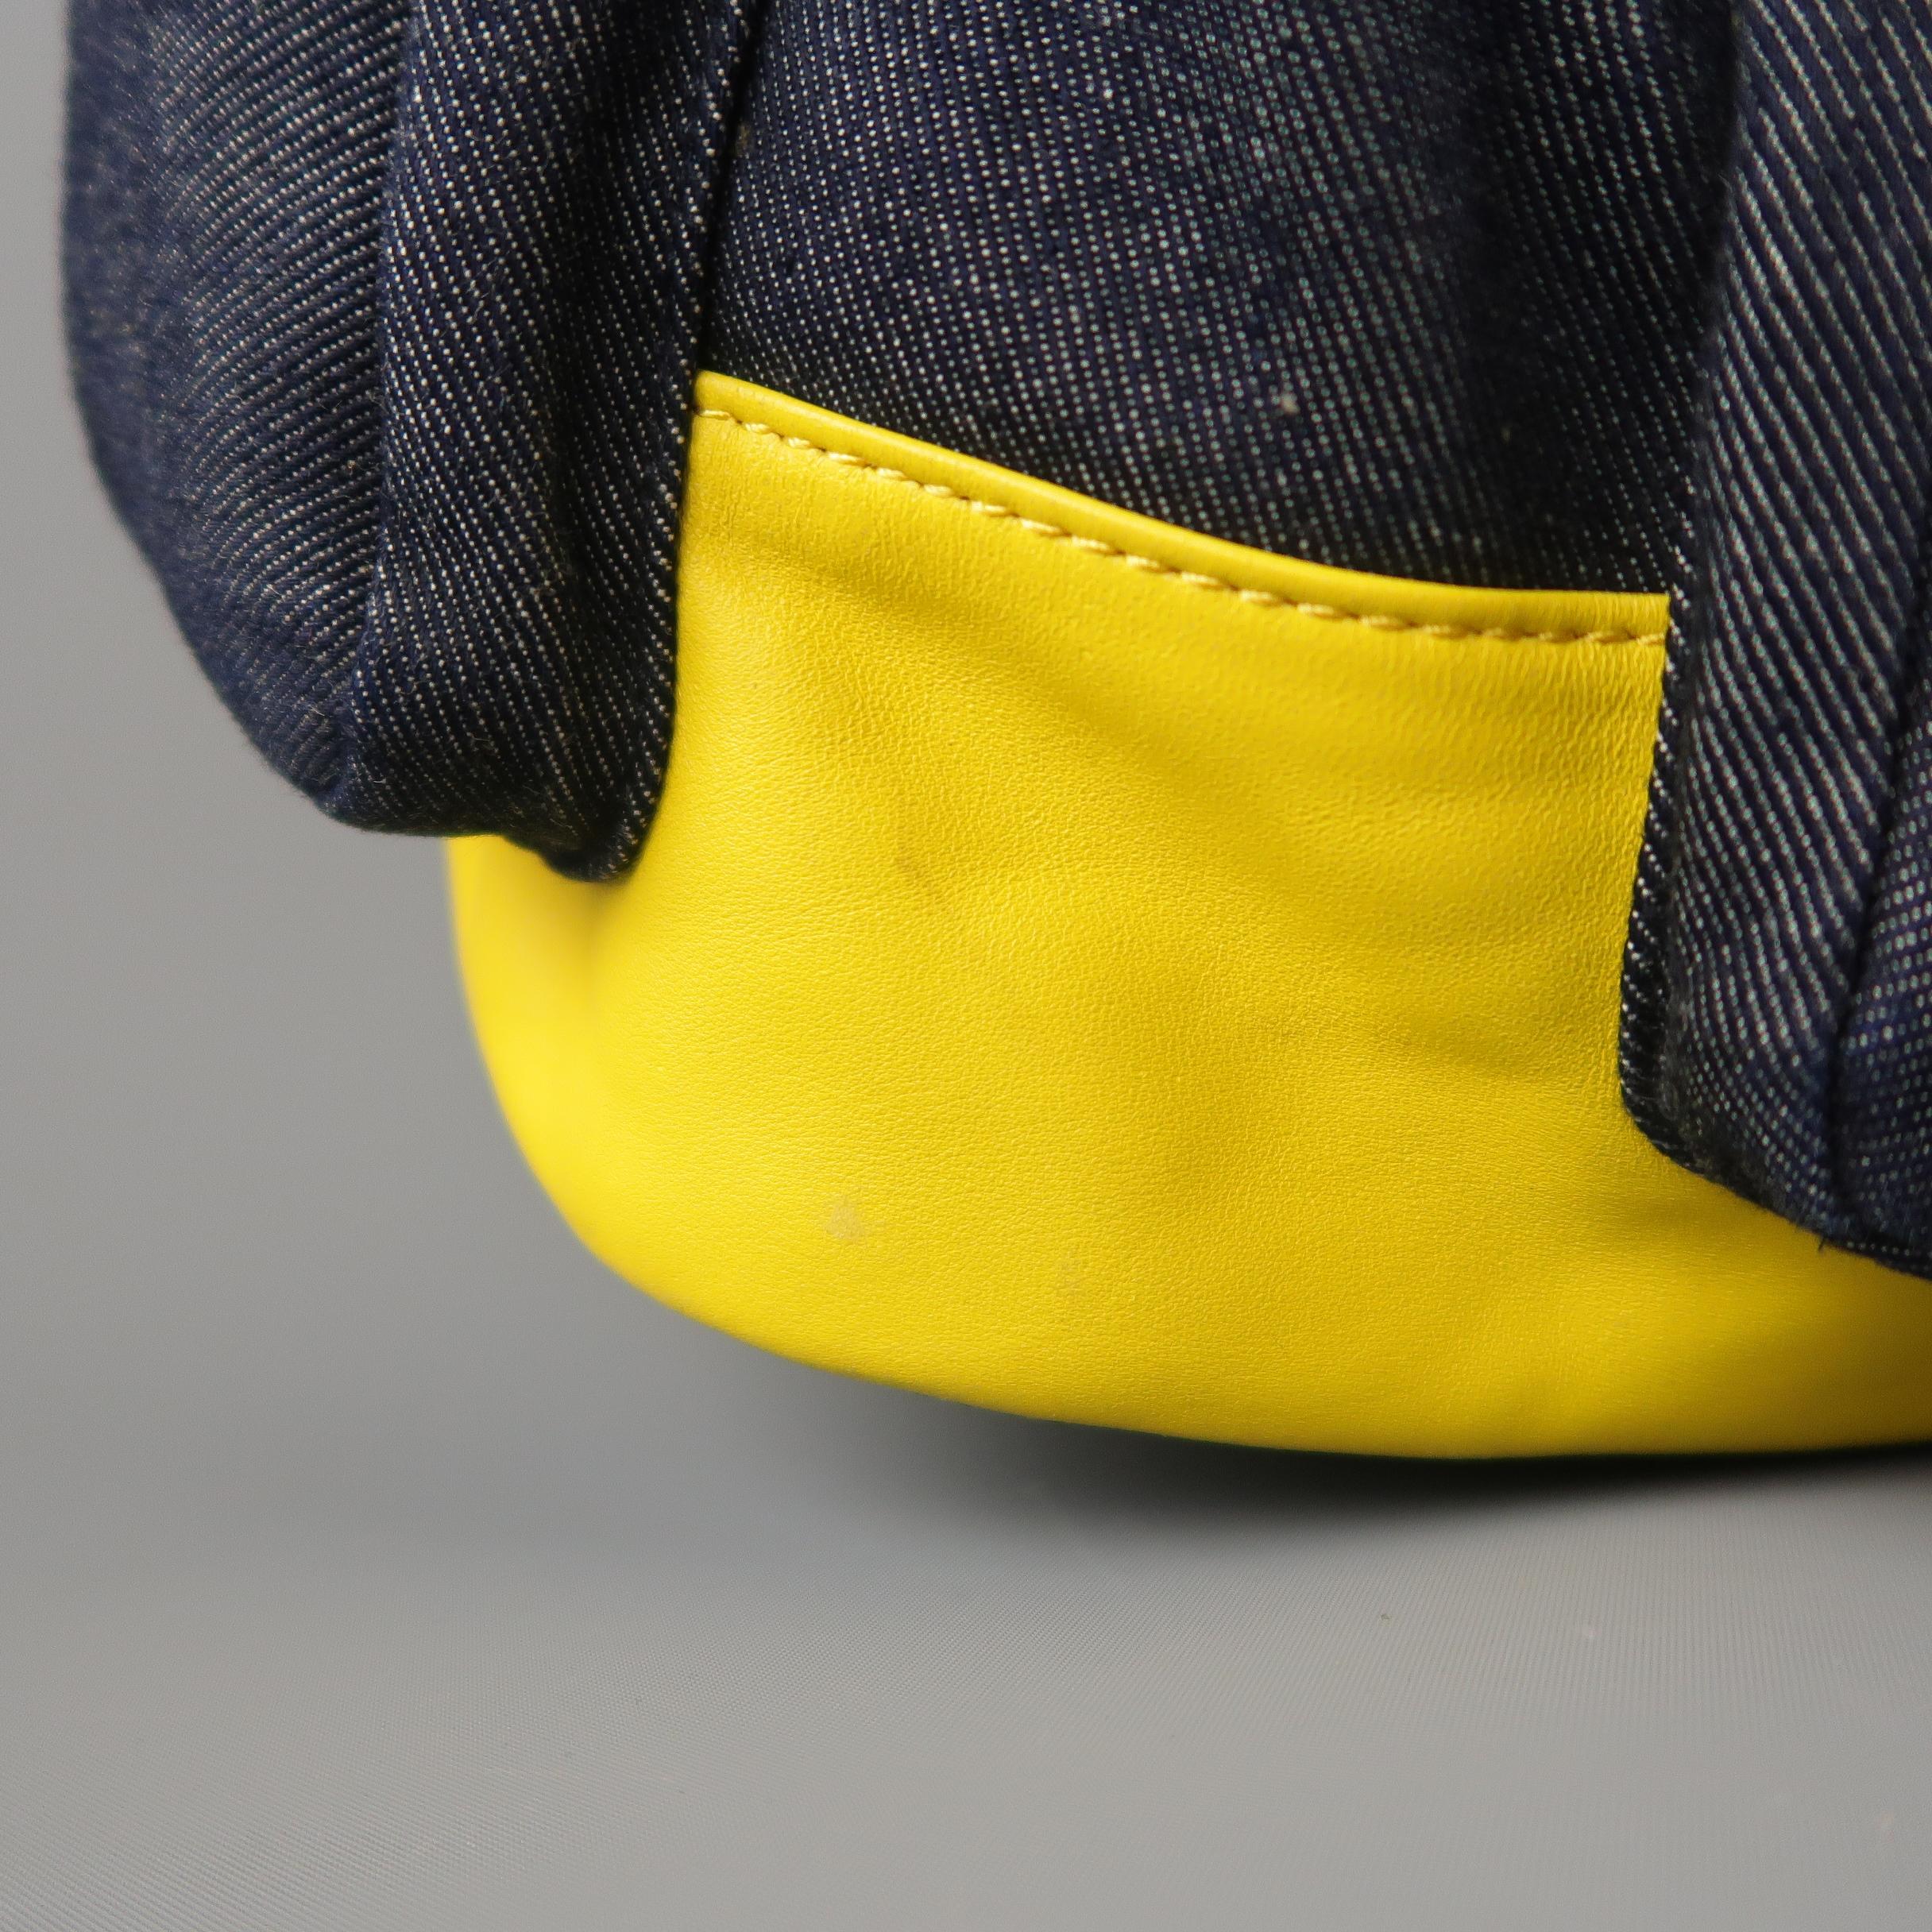 DSQUARED2 Navy Denim & Yellow Leather Backpack 9